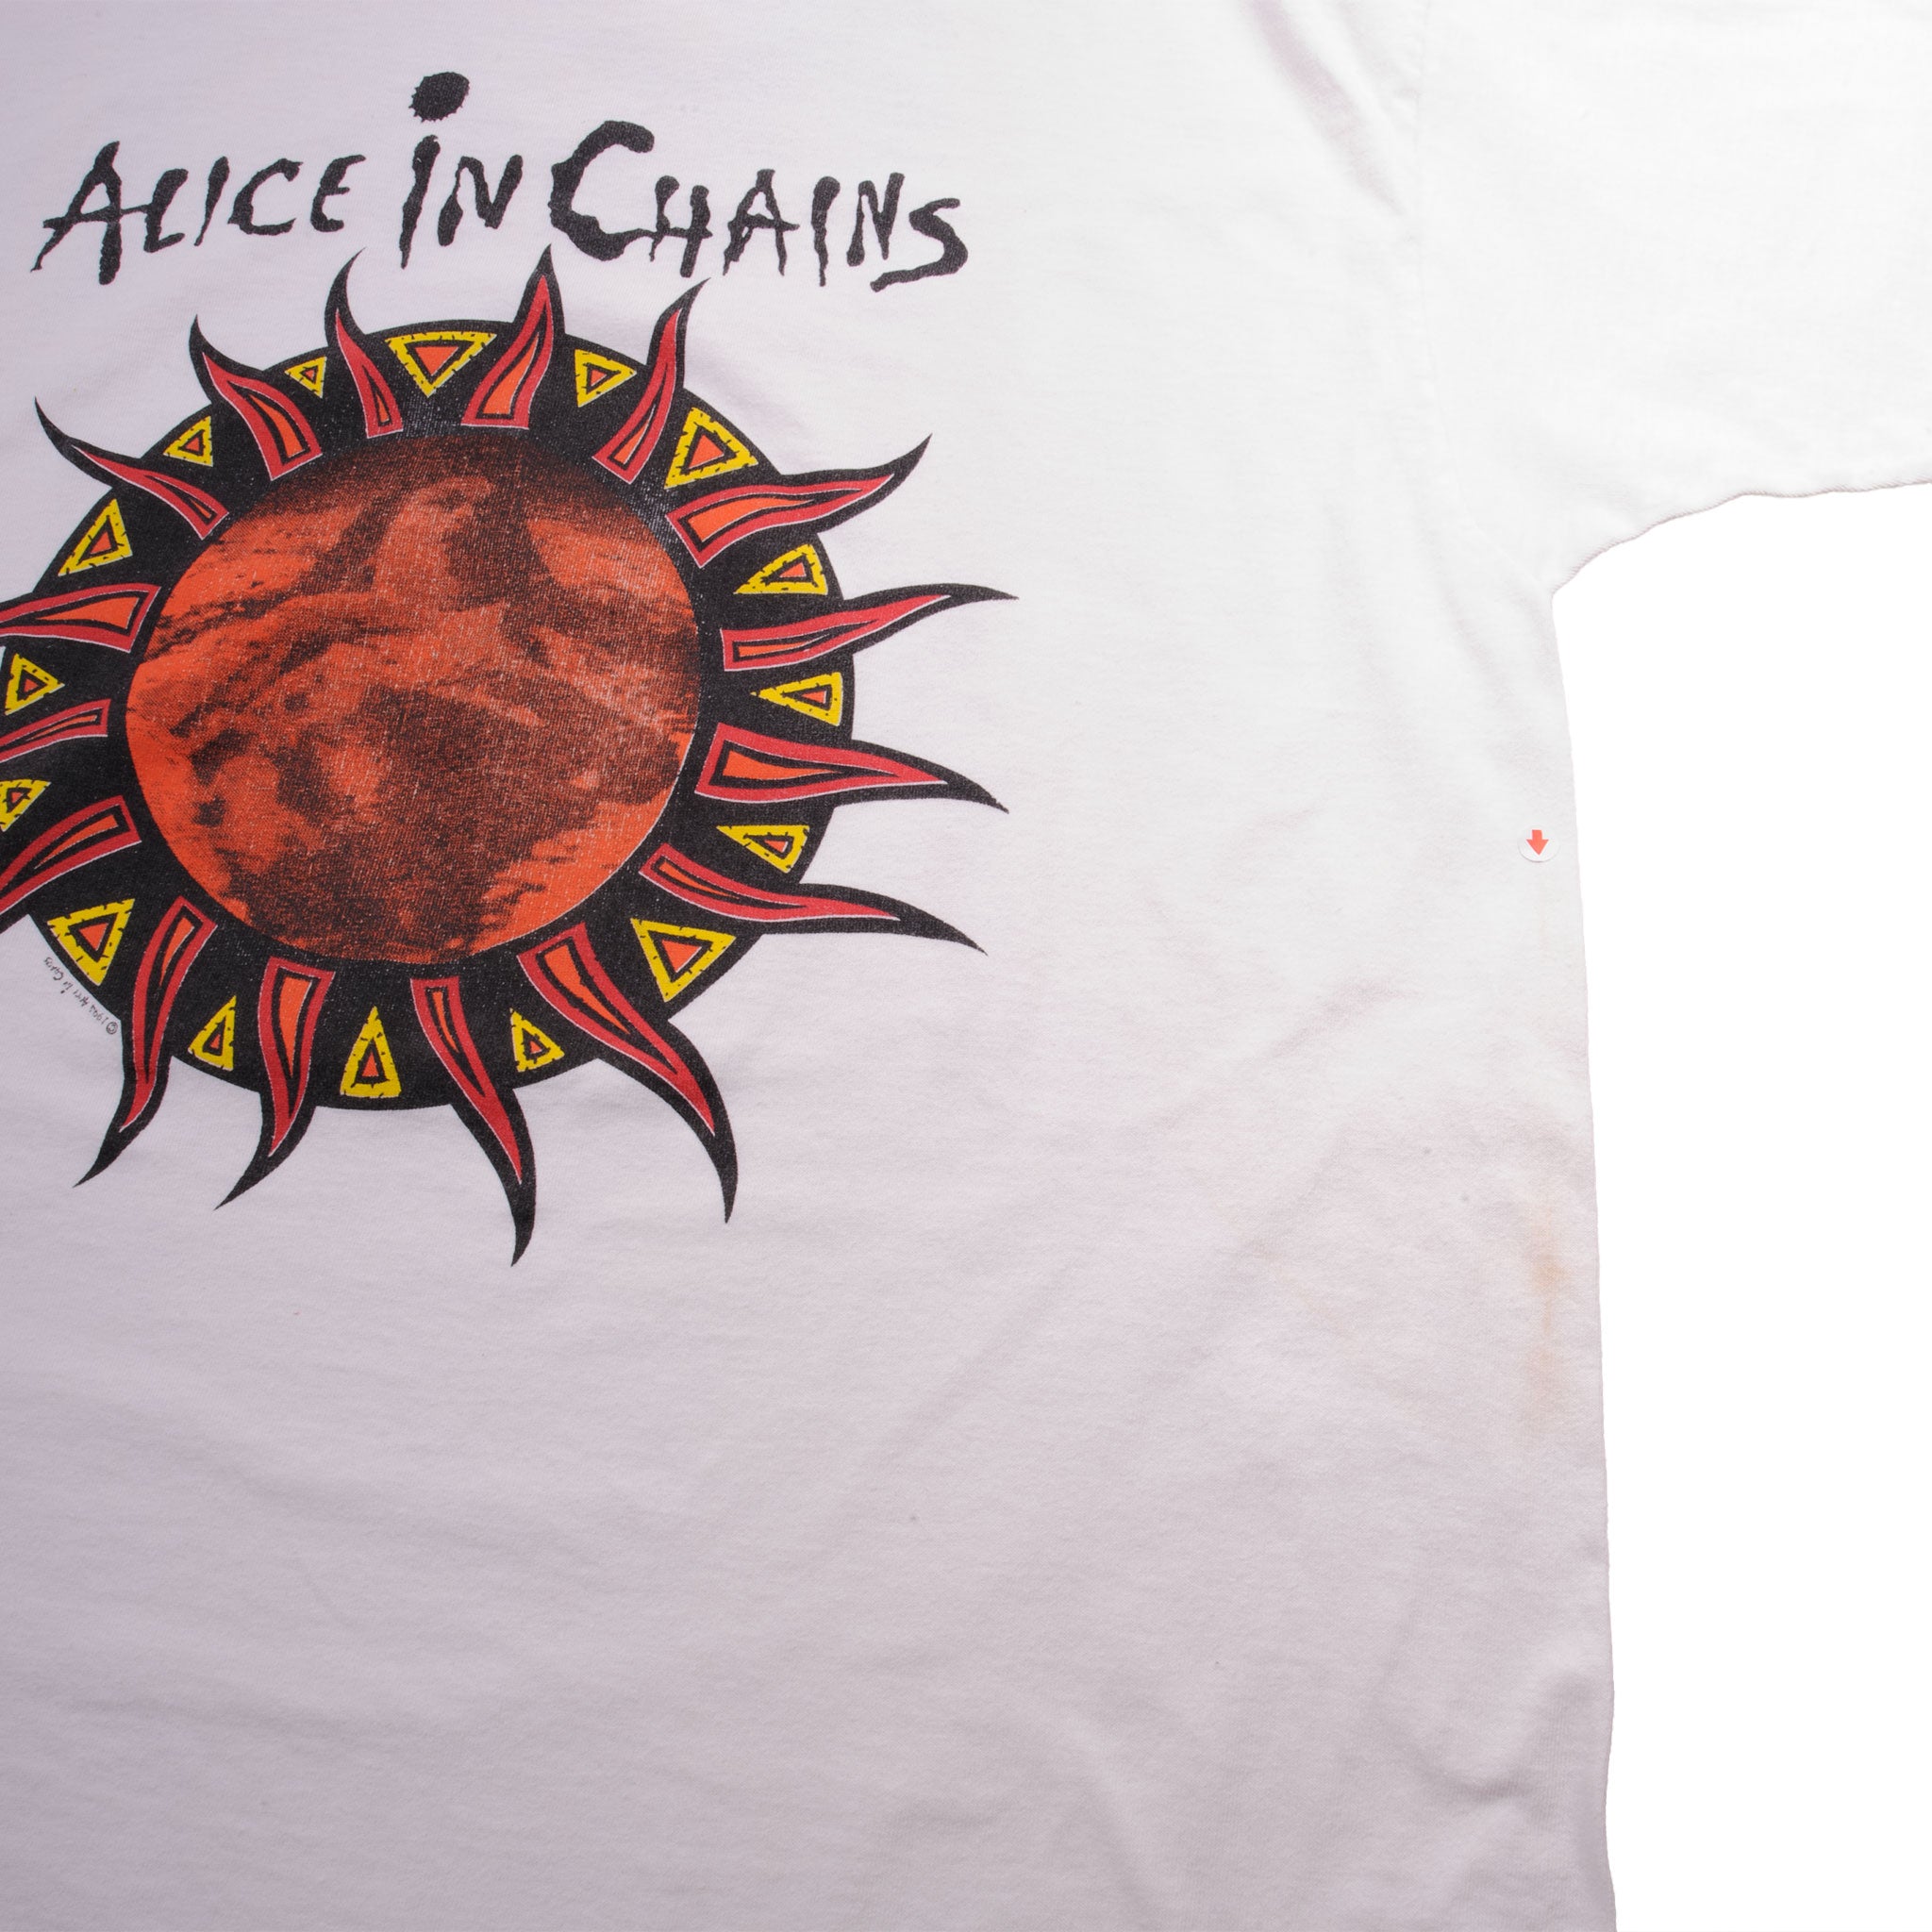 VINTAGE ALICE IN CHAINS LOLLAPALOOZA' 93 TEE SHIRT 1994 SIZE XL MADE IN USA